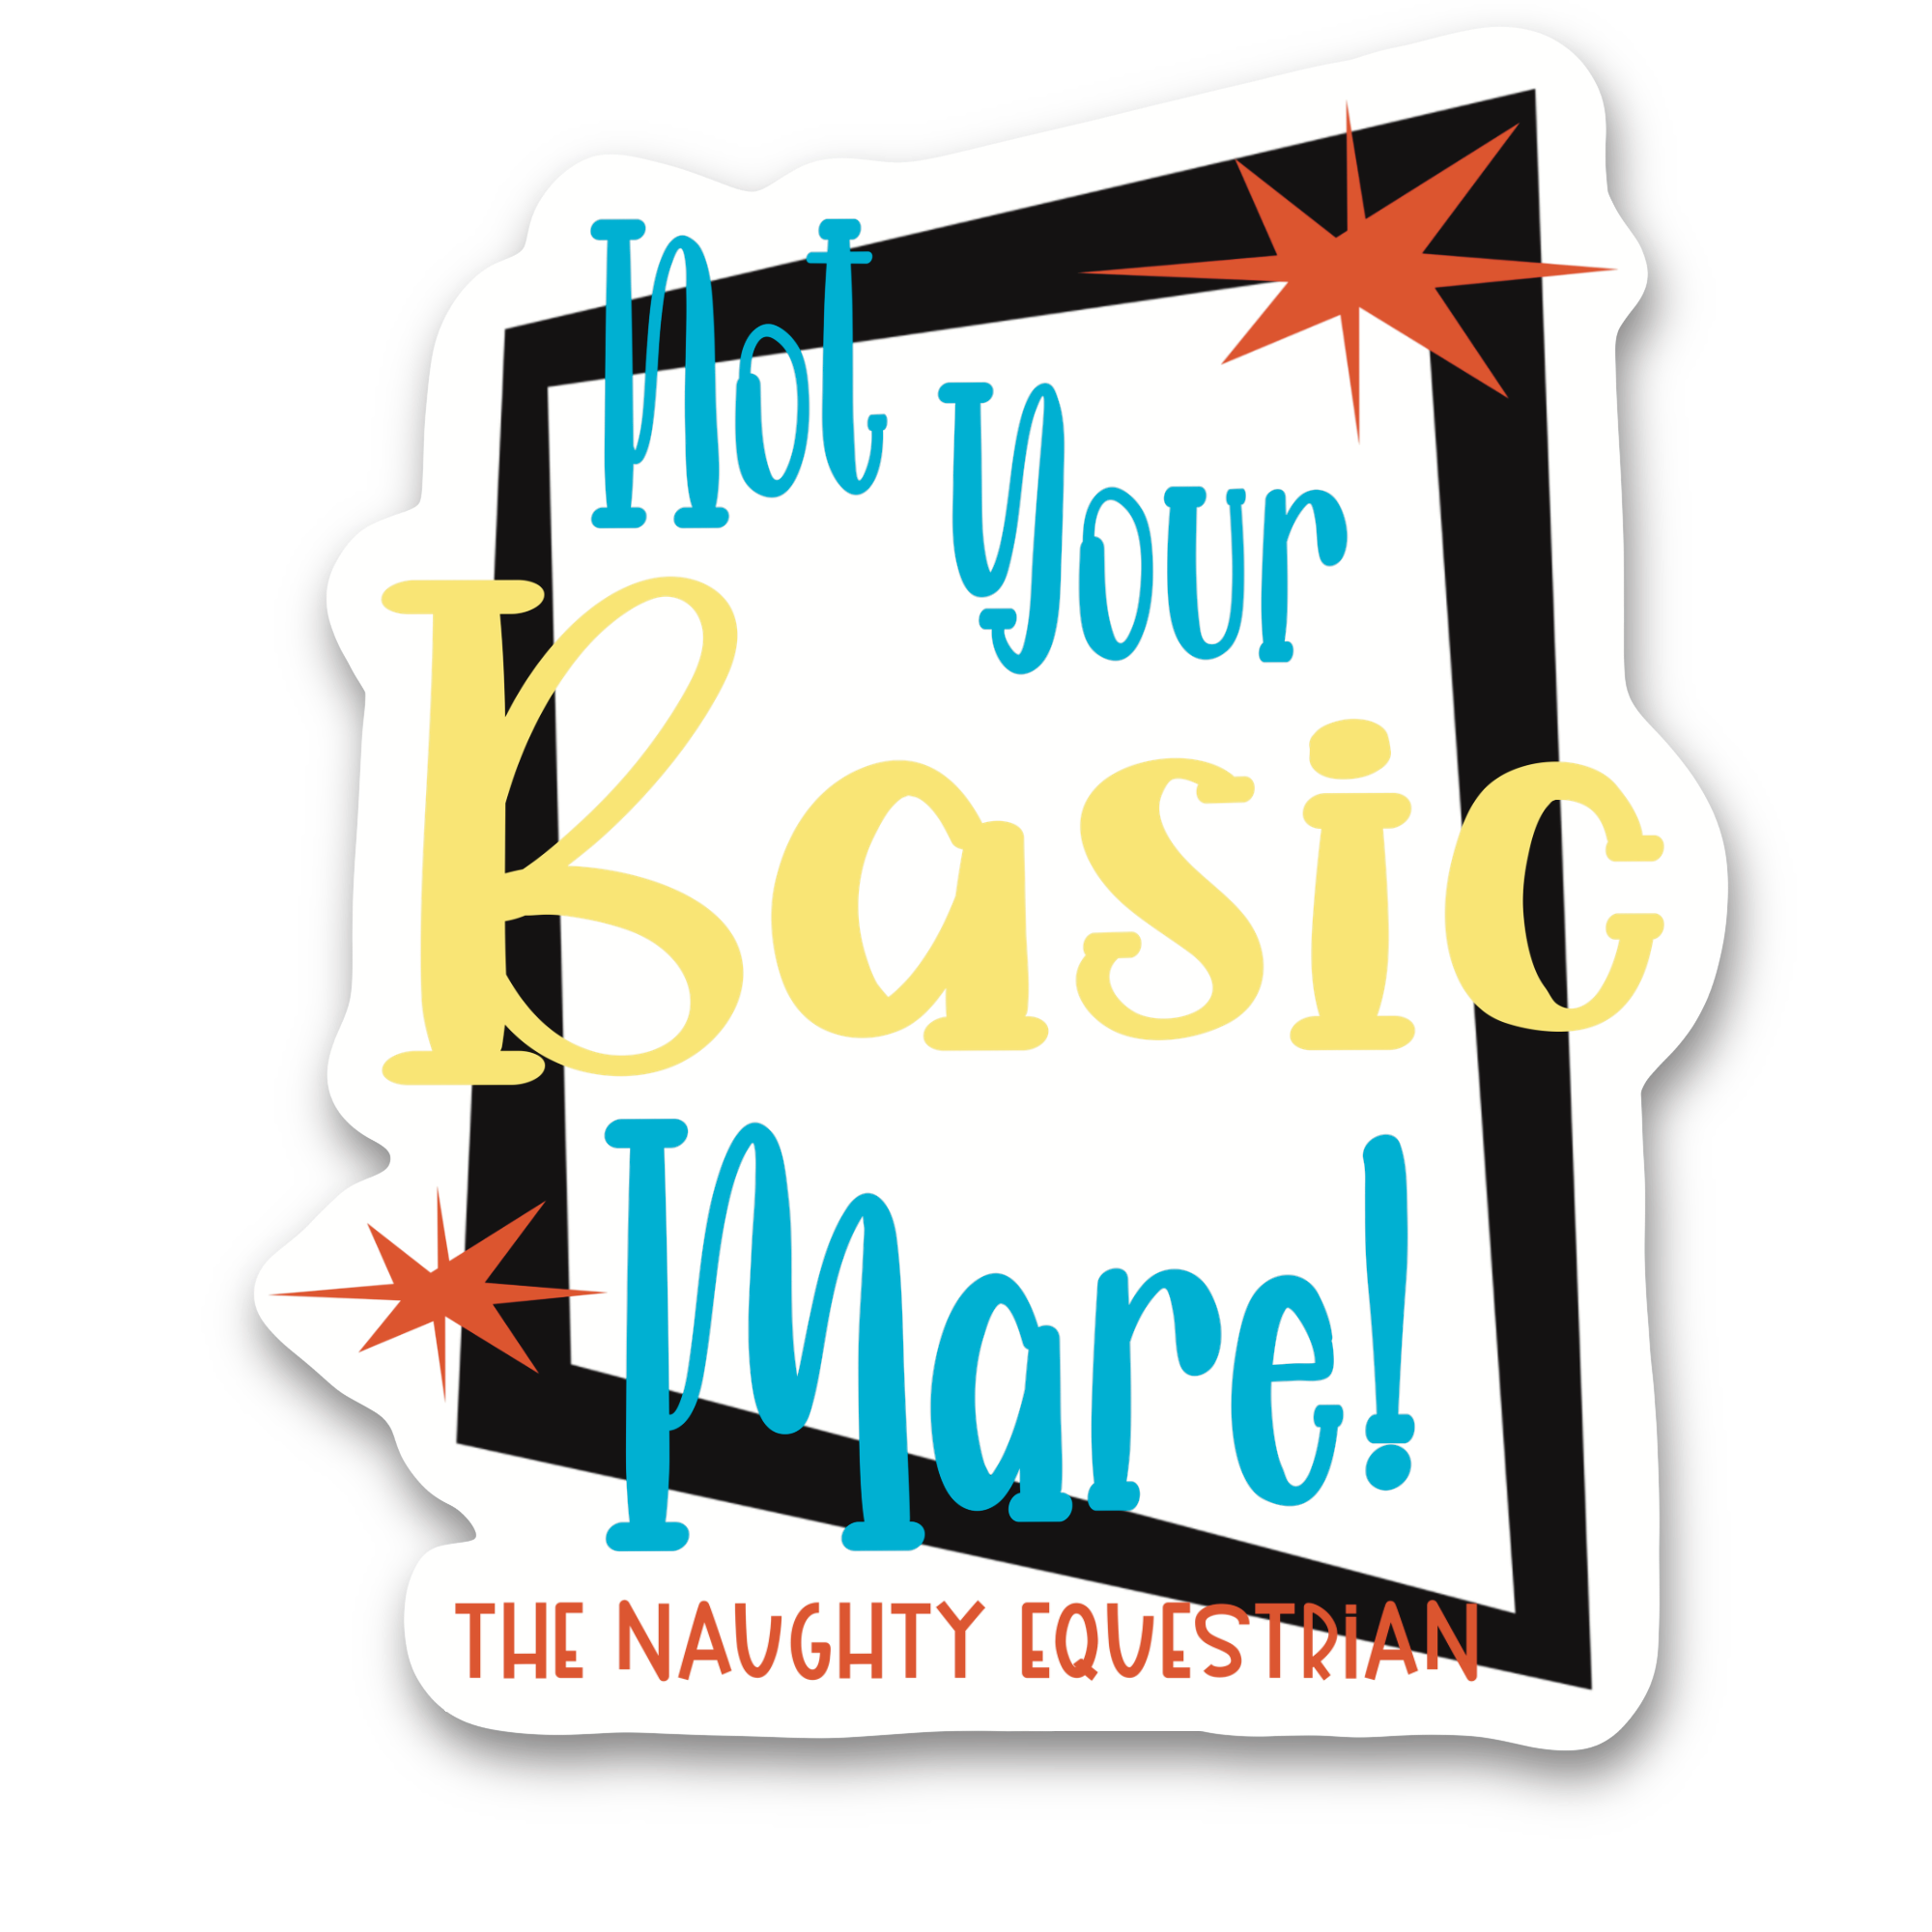 Not Your Basic Mare Equestrian Sticker